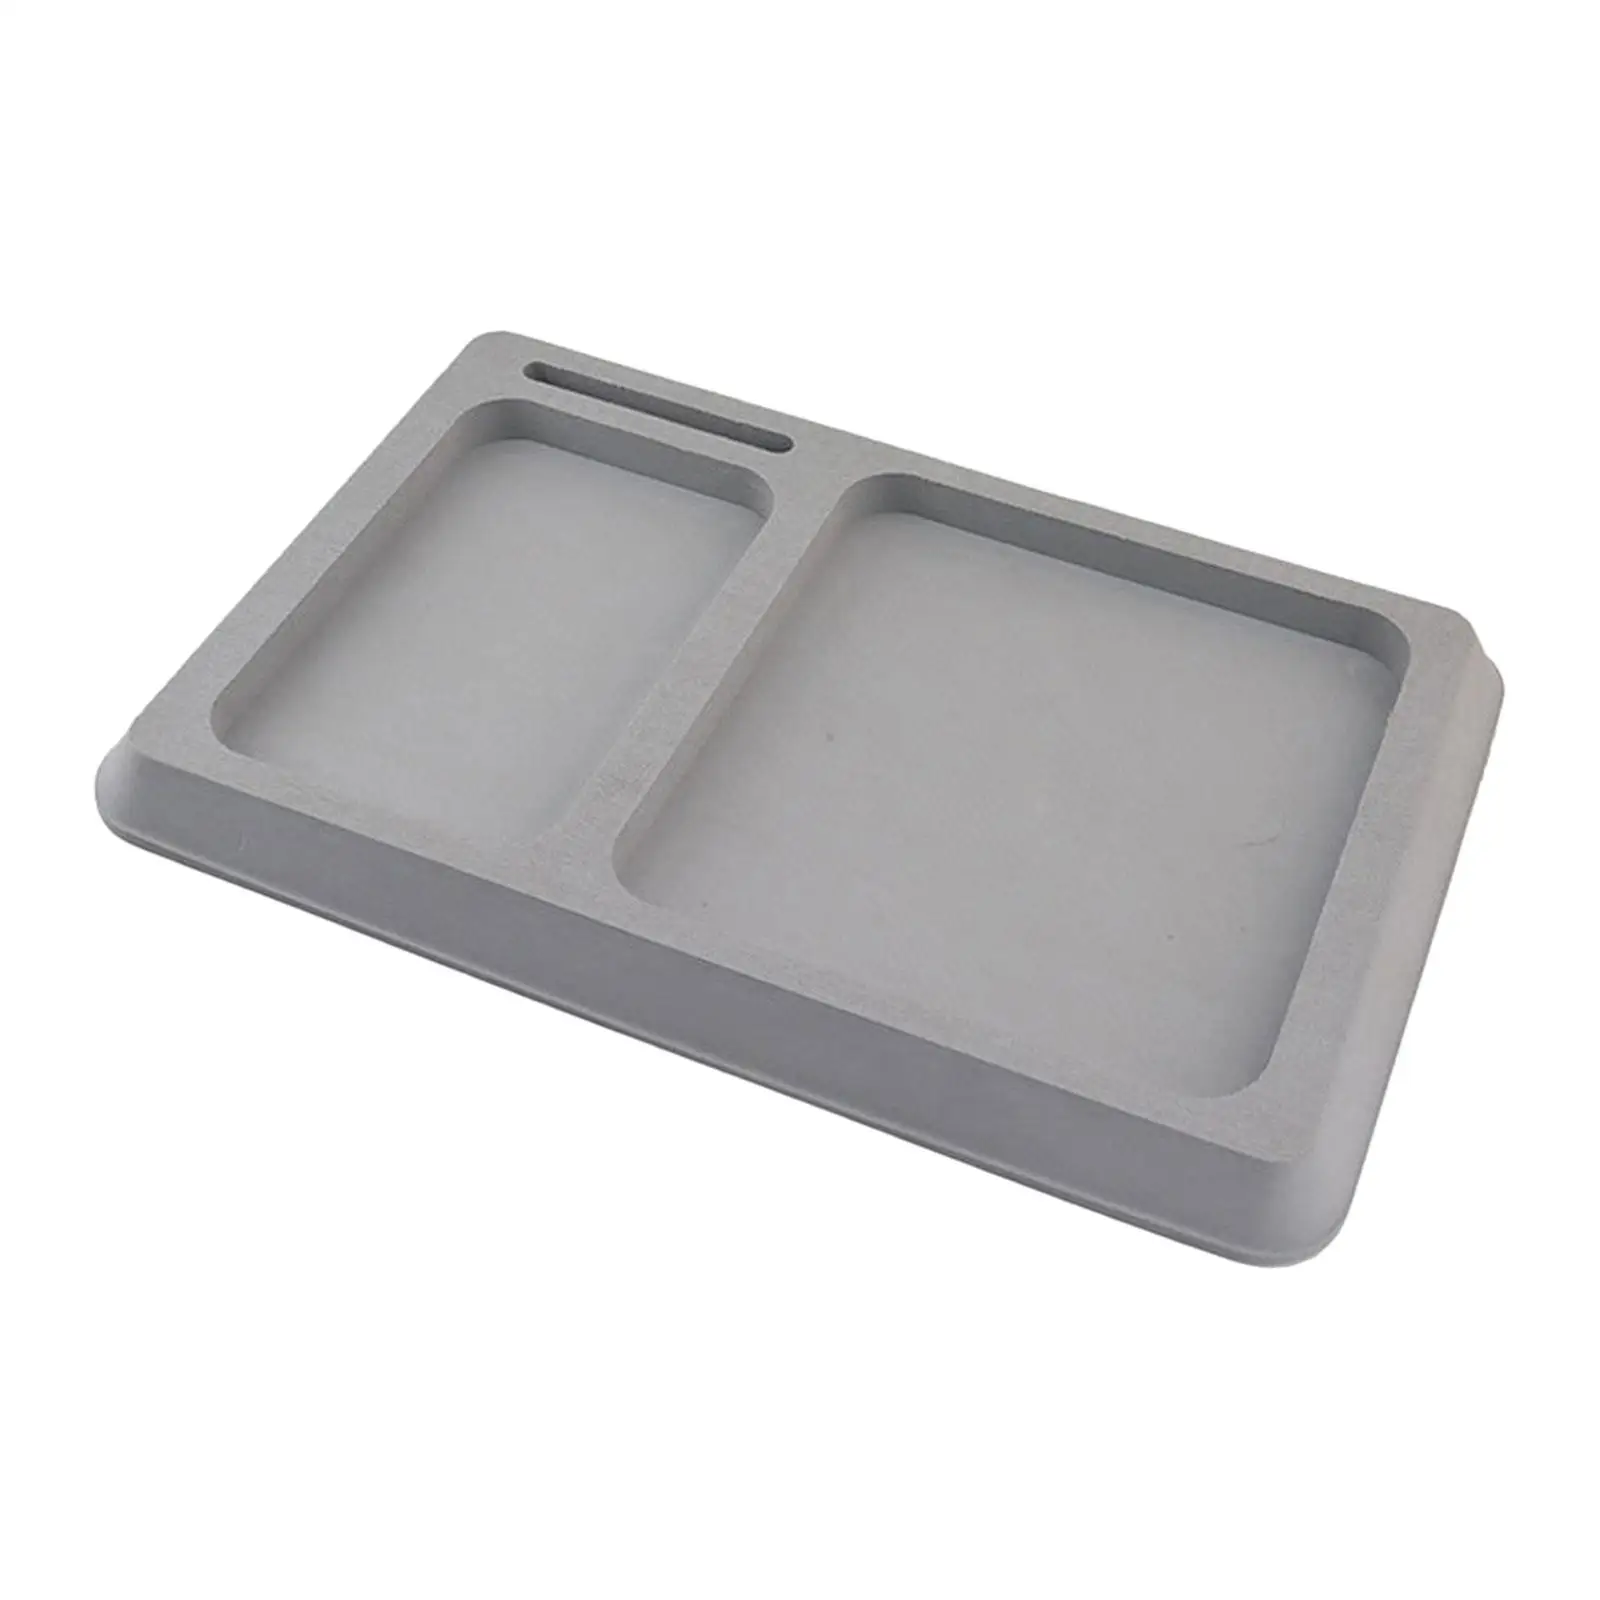 Phone Boat Dash Anti Skid Easy to Install Spare Multifunction Supplies Tray Box for Fishing Keys Marine Phone Small Items